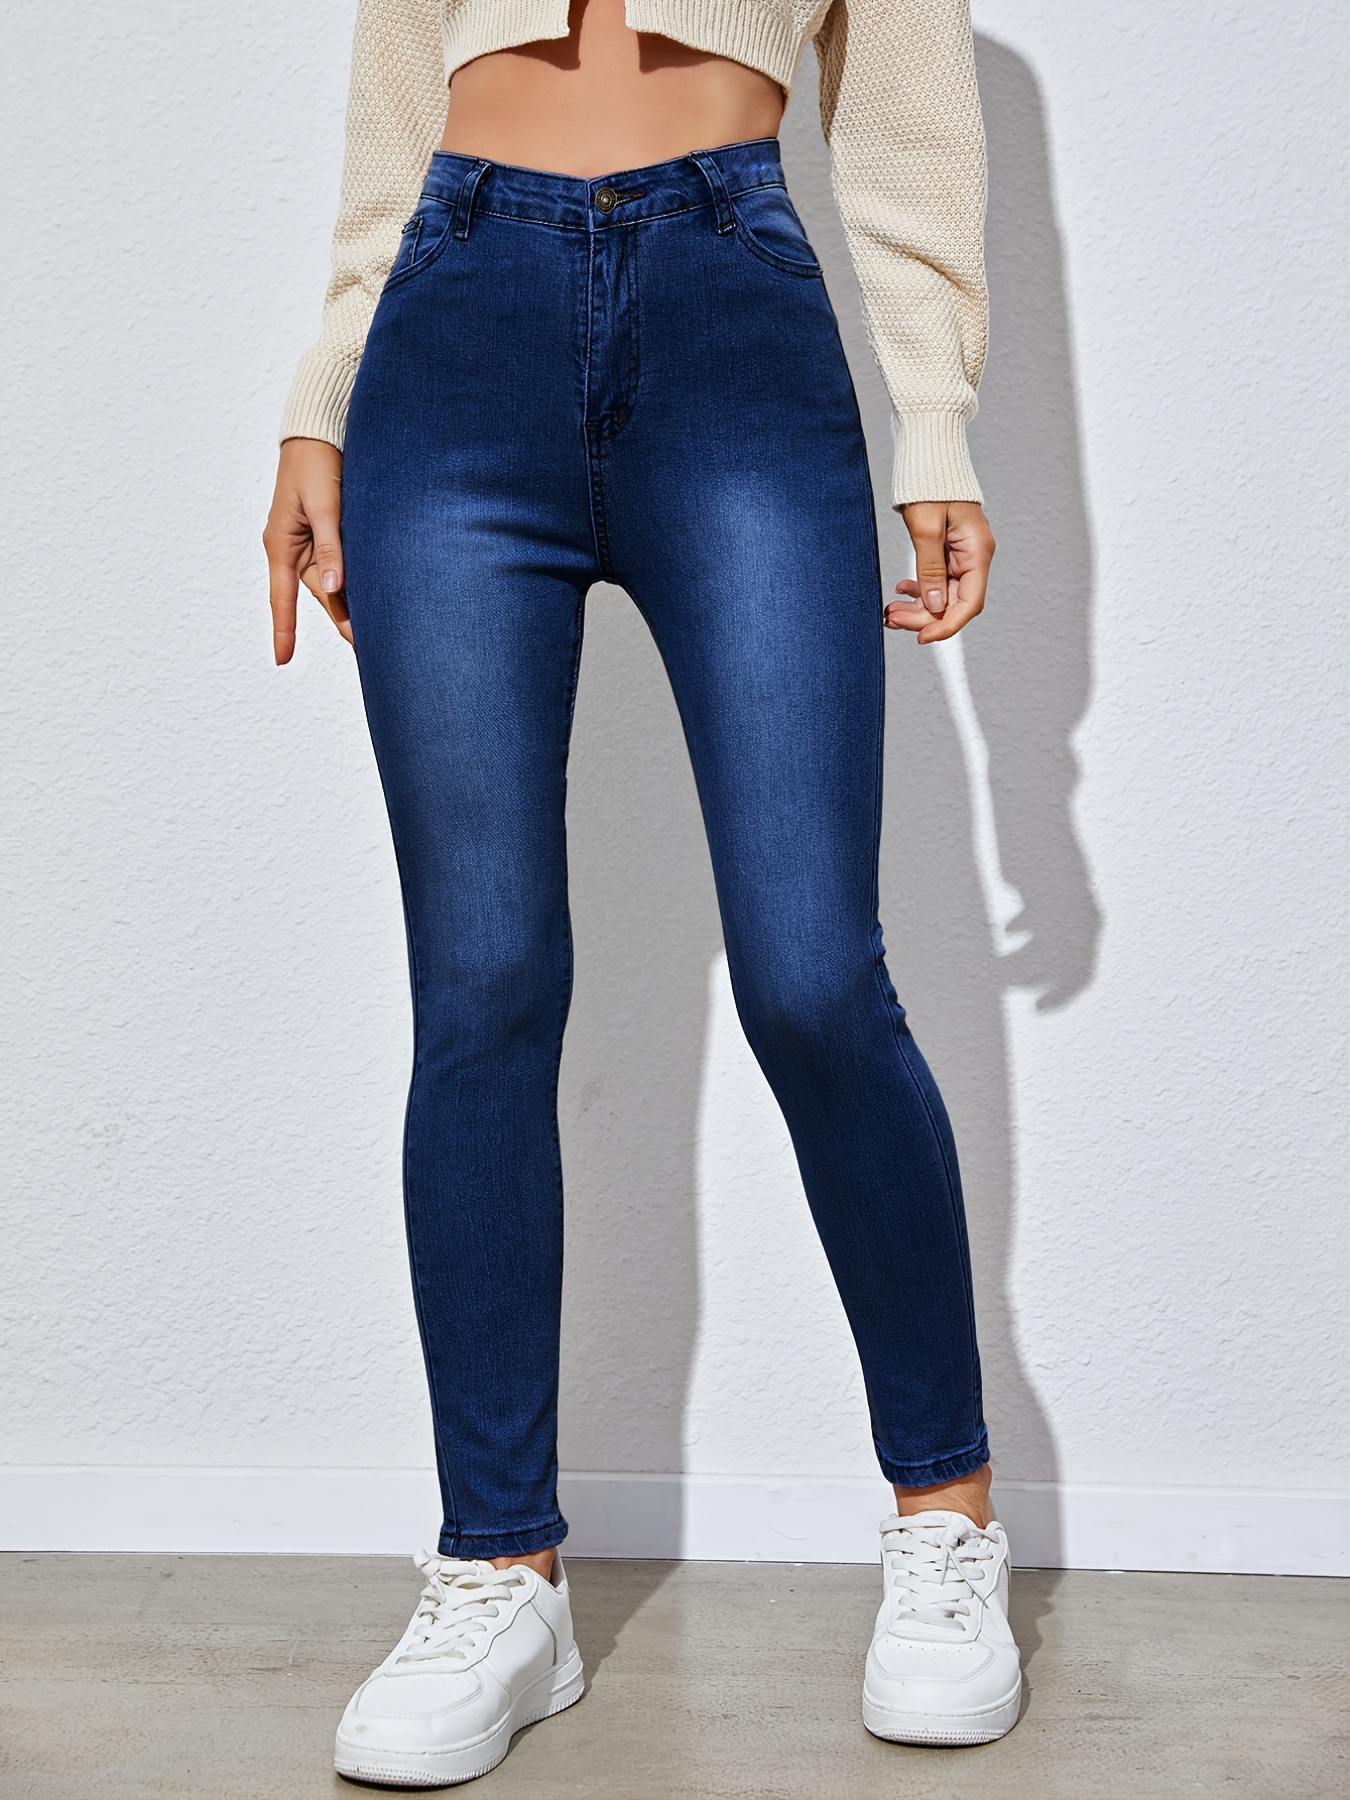 High * Solid Color Skinny Jeans, High Waist Stretchy Tight Fit Plain Design  Denim Pants, Women's Denim & Clothing